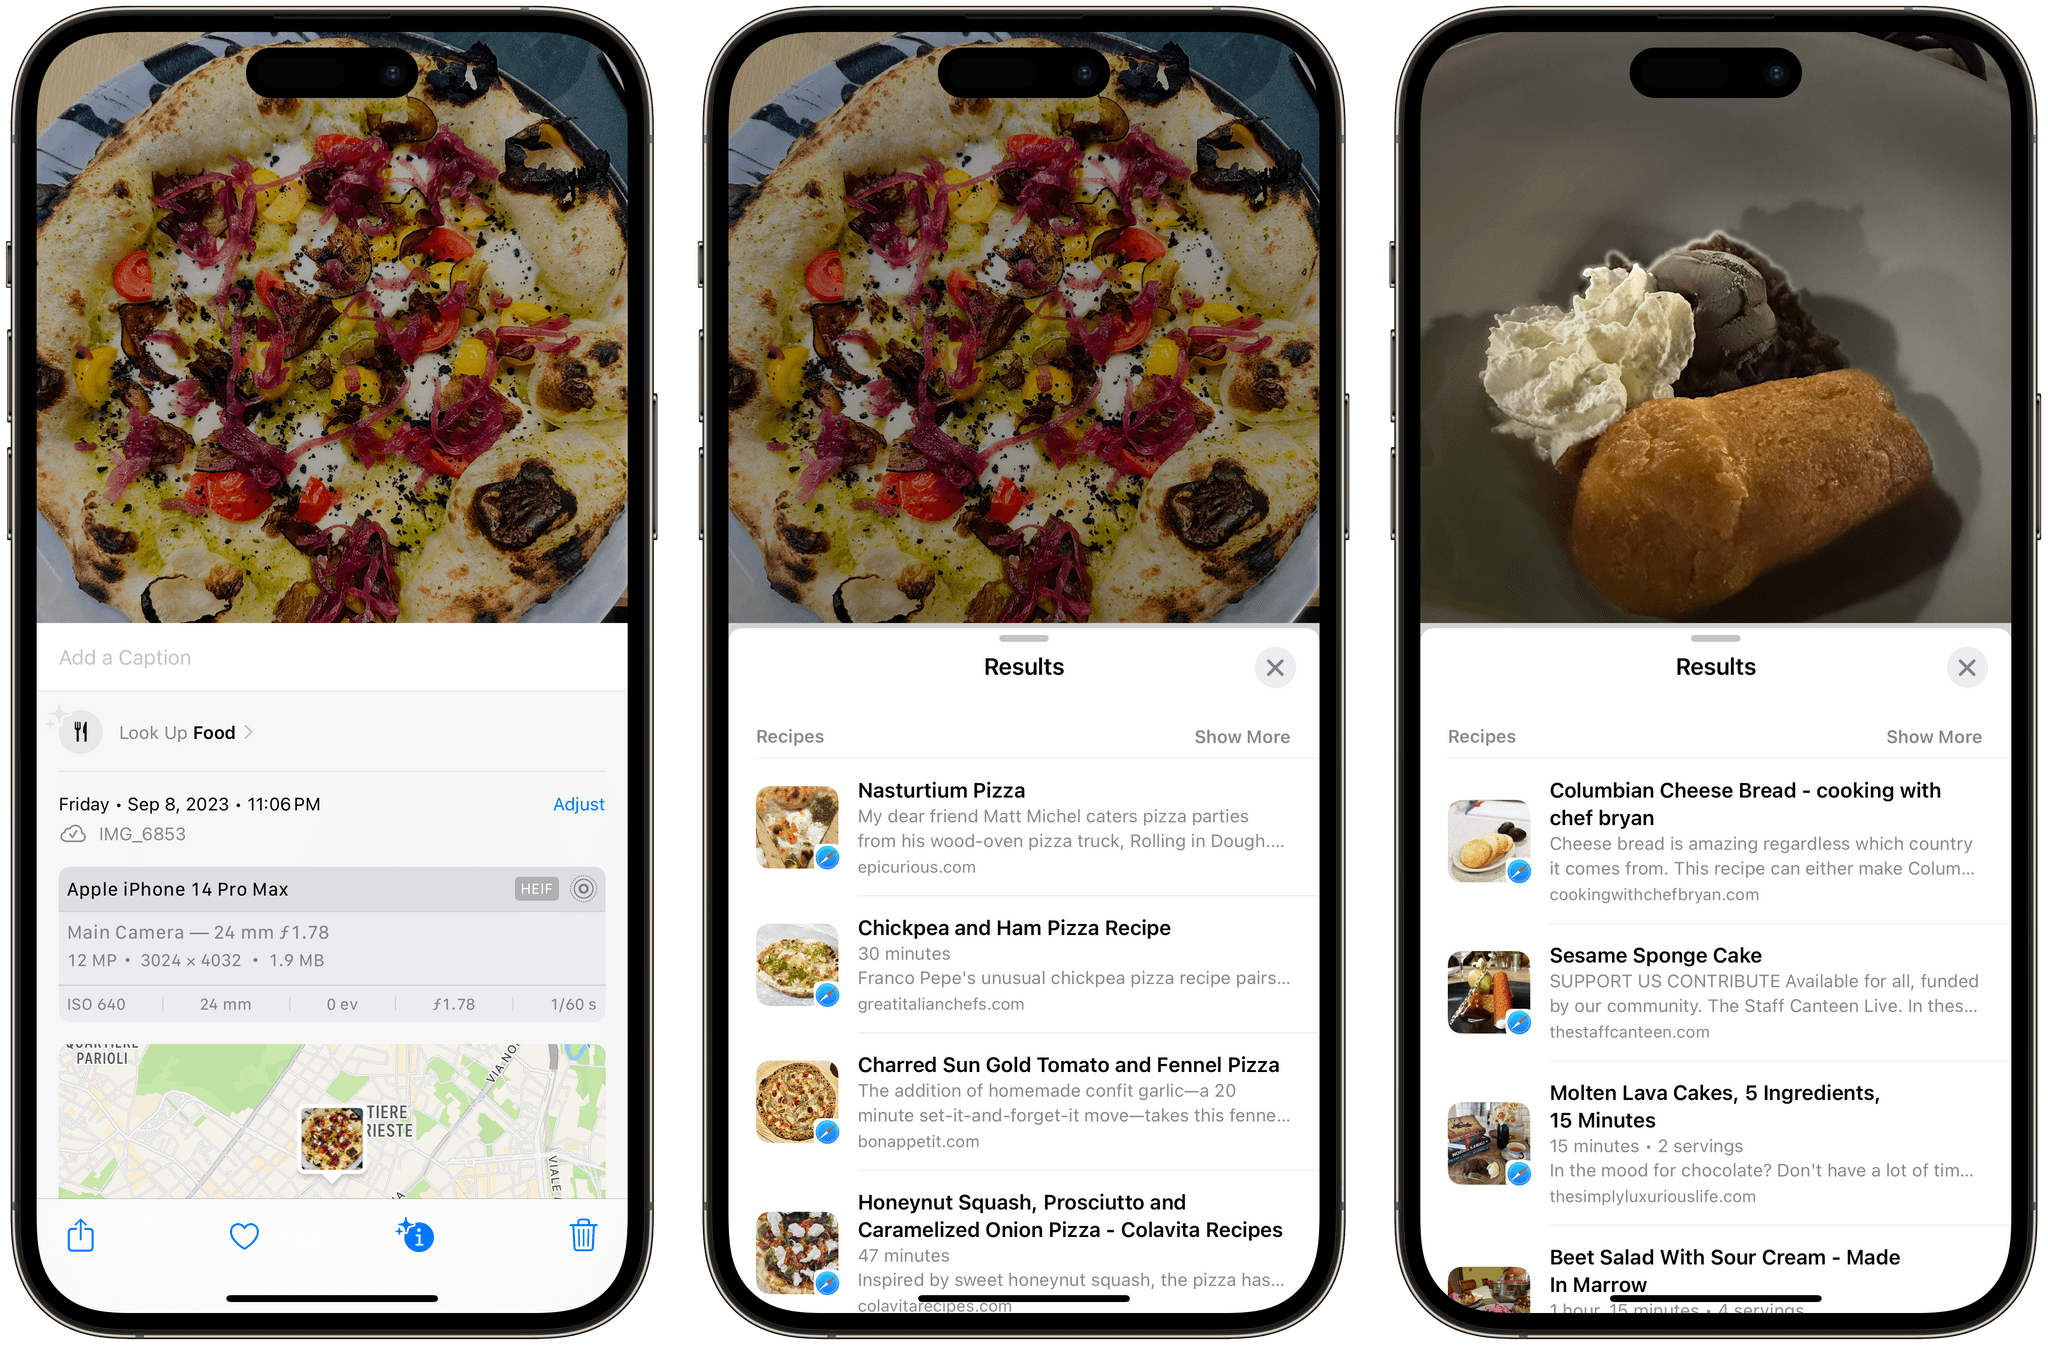 Recipe support in Visual LookUp for iOS 17. Those suggestions on the right...oh boy.